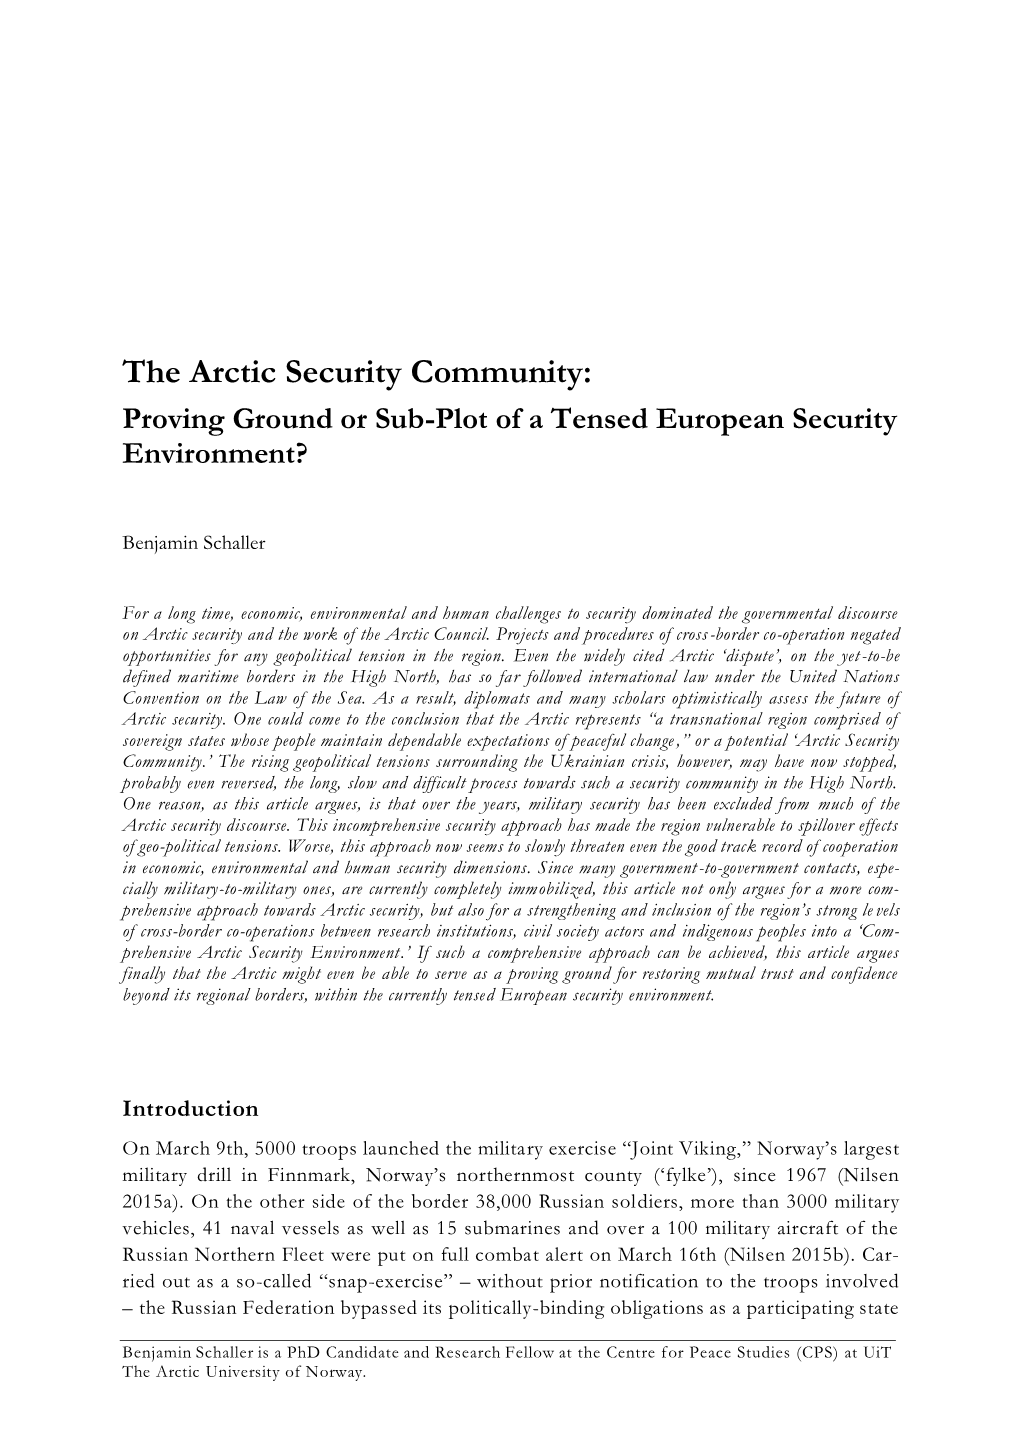 The Arctic Security Community: Proving Ground Or Sub-Plot of a Tensed European Security Environment?